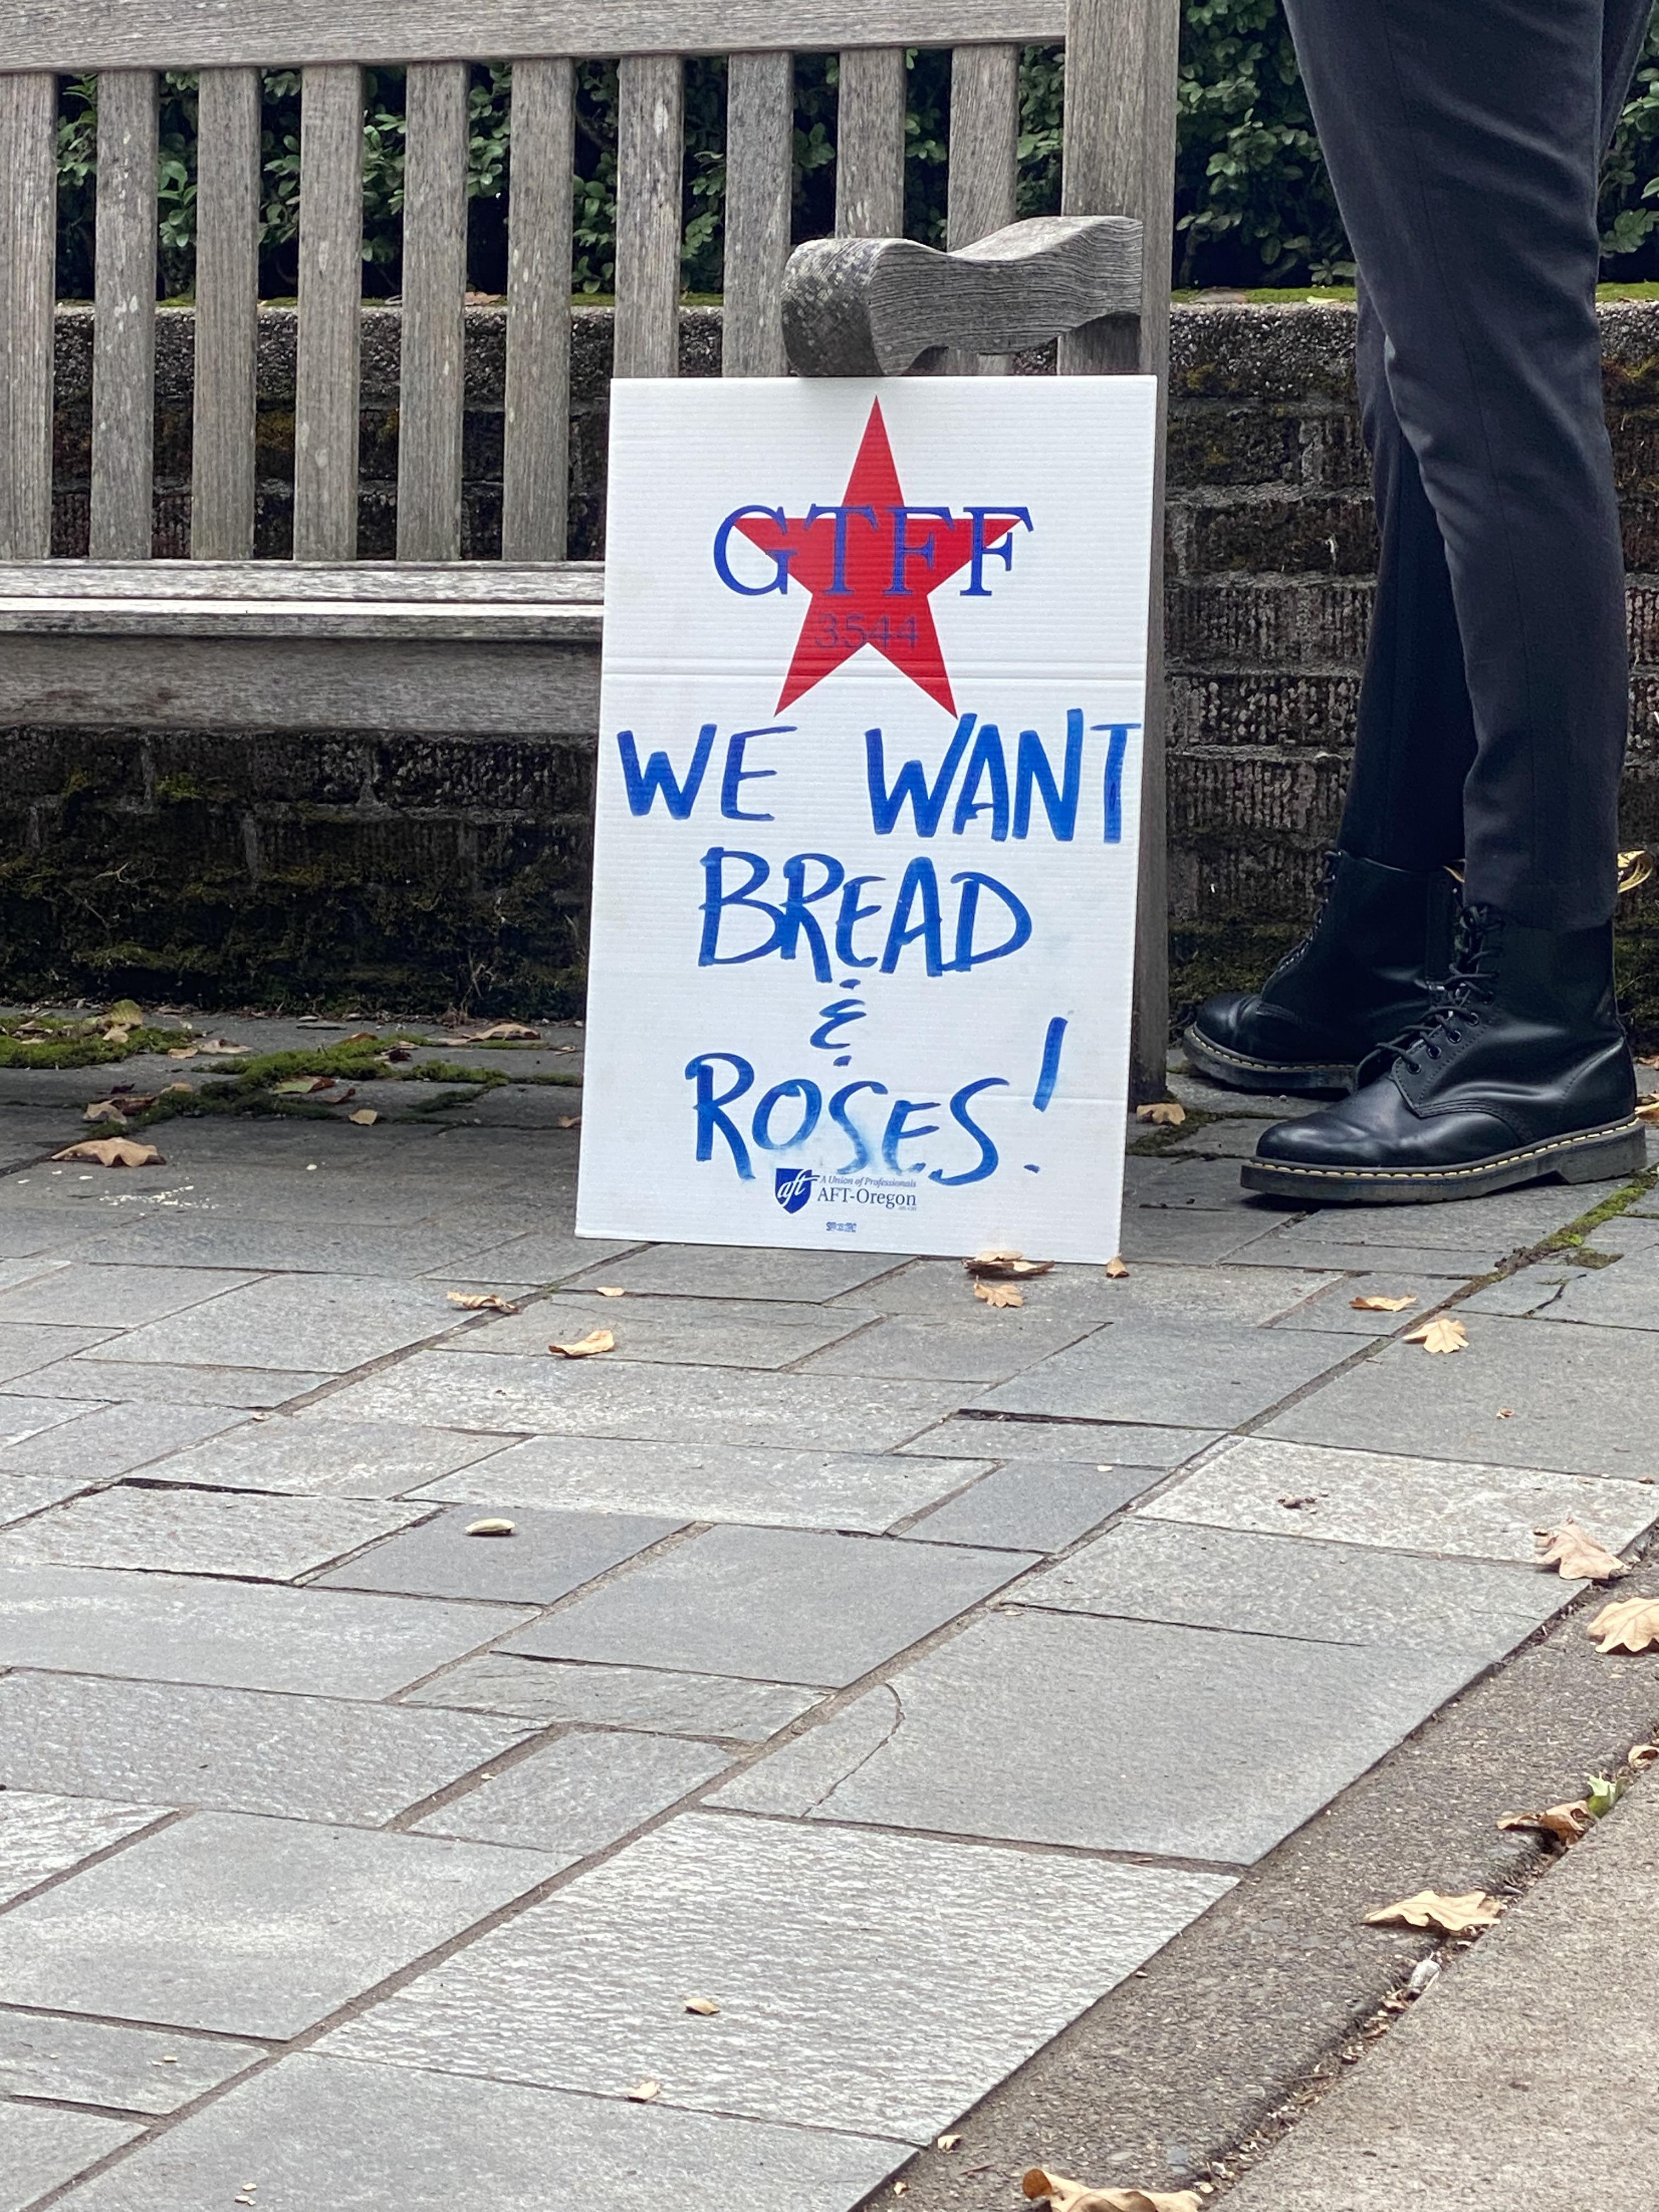 A sign held at the picket reading “We Want Bread & Roses!” Bread and Roses is a political slogan based off of a poem and is commonly associated with the 1912 Textile Strike in Lawrence, Massachusetts - appealing for fair wages and dignified conditions.